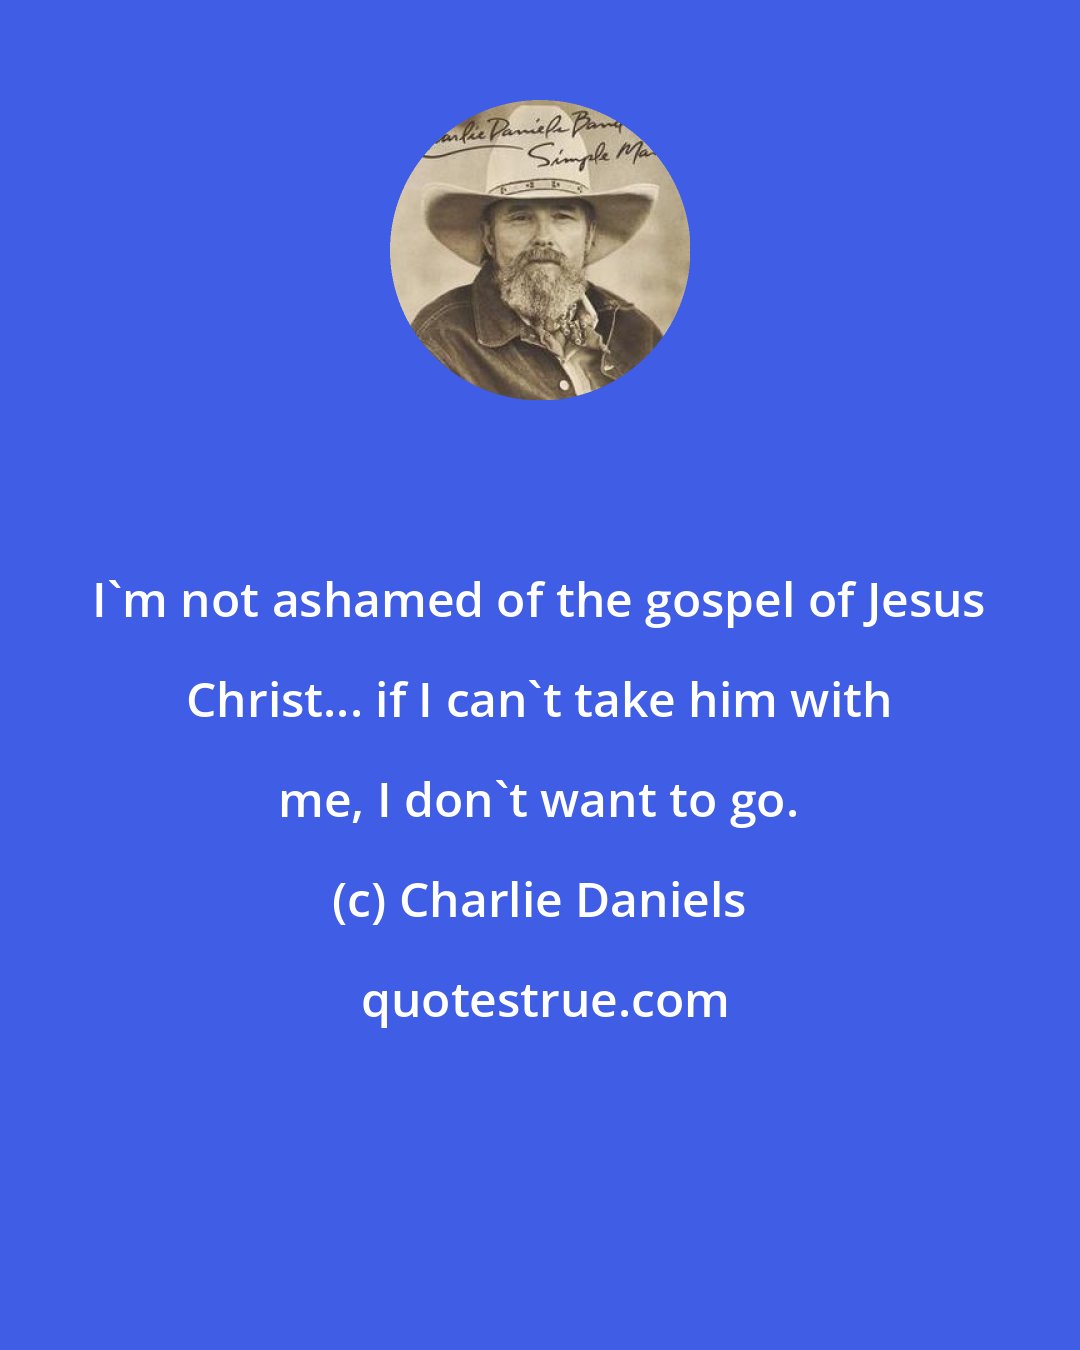 Charlie Daniels: I'm not ashamed of the gospel of Jesus Christ... if I can't take him with me, I don't want to go.